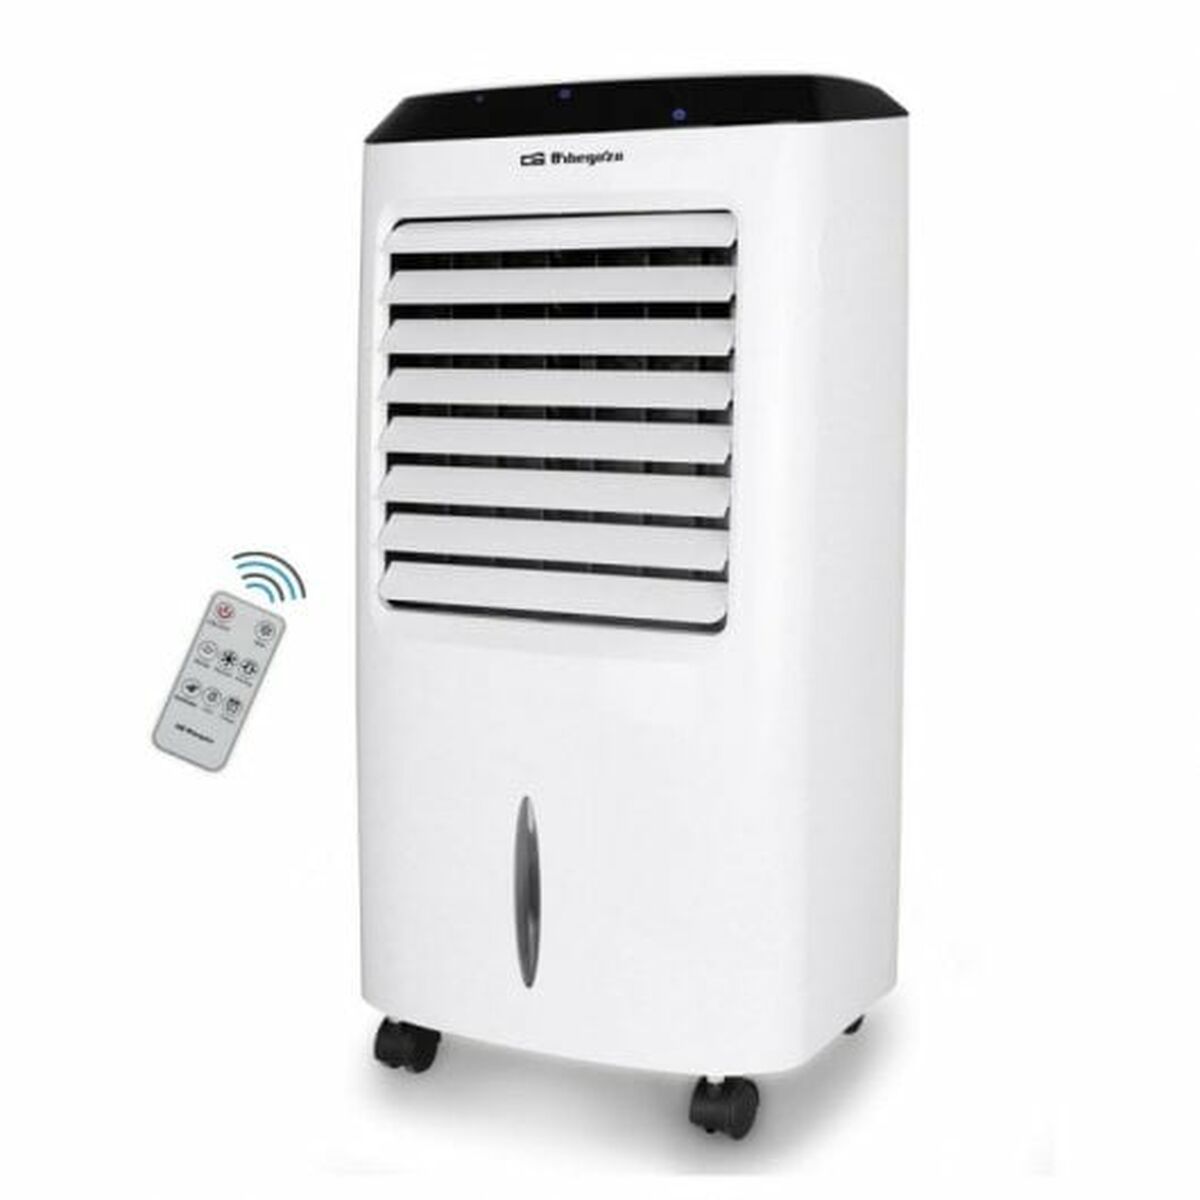 Draagbare Airconditioning Orbegozo AIR 52 65 W Zwart/Wit